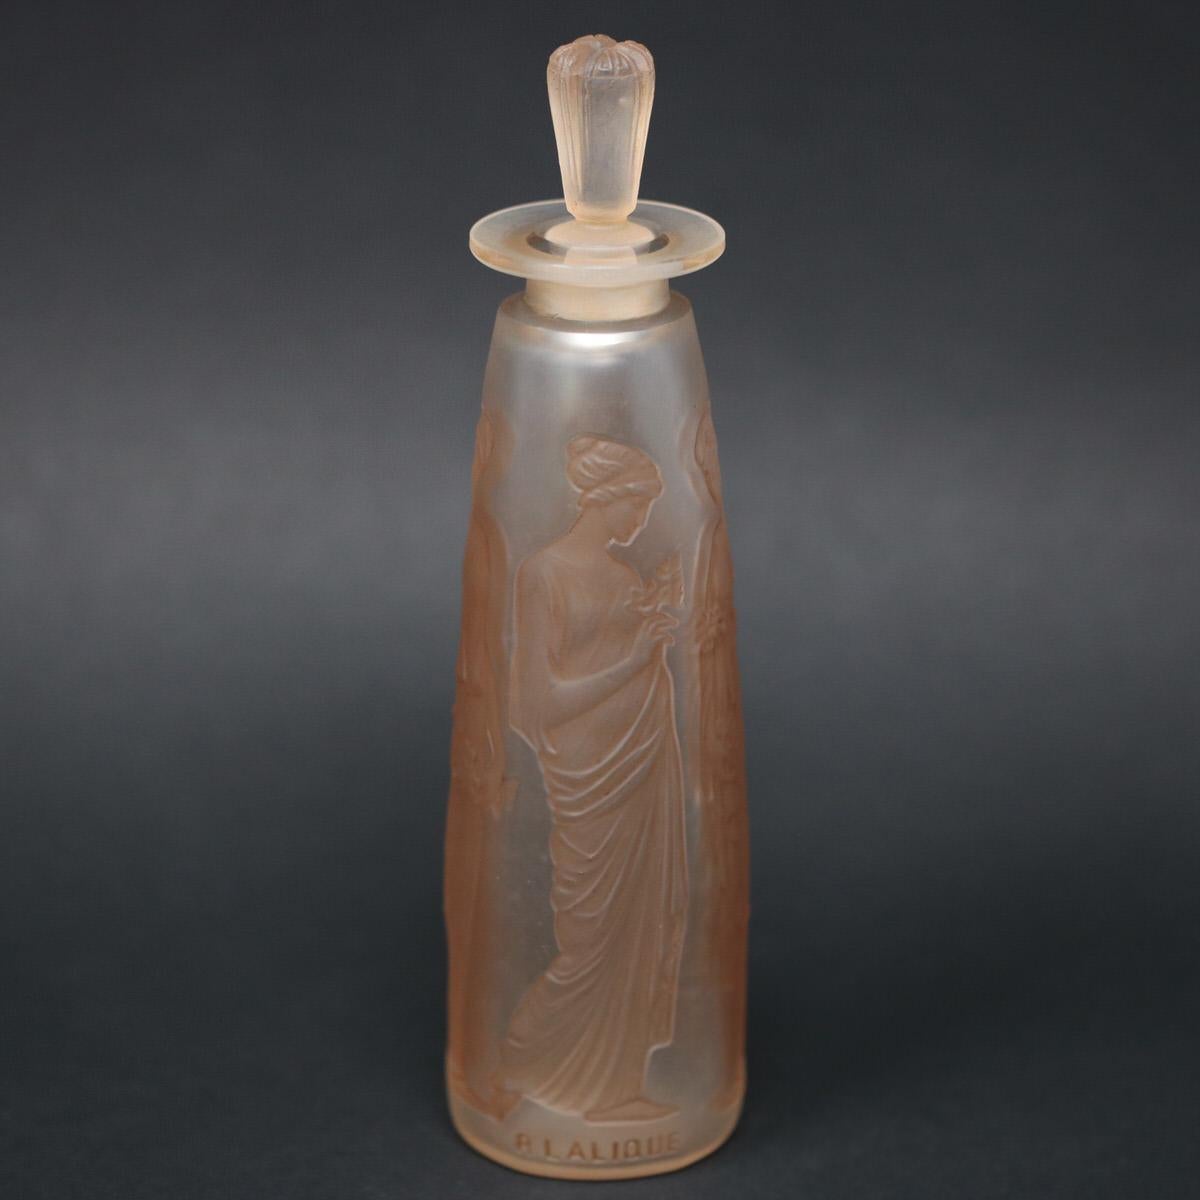 René Lalique clear and frosted, sepia stained glass perfume bottle. 'Ambre antique' design. This design features robed maidens, holding flower bouquets. Moulded makers mark, 'R LALIQUE'. Engraved letters to the underside. Book reference: Marcilhac